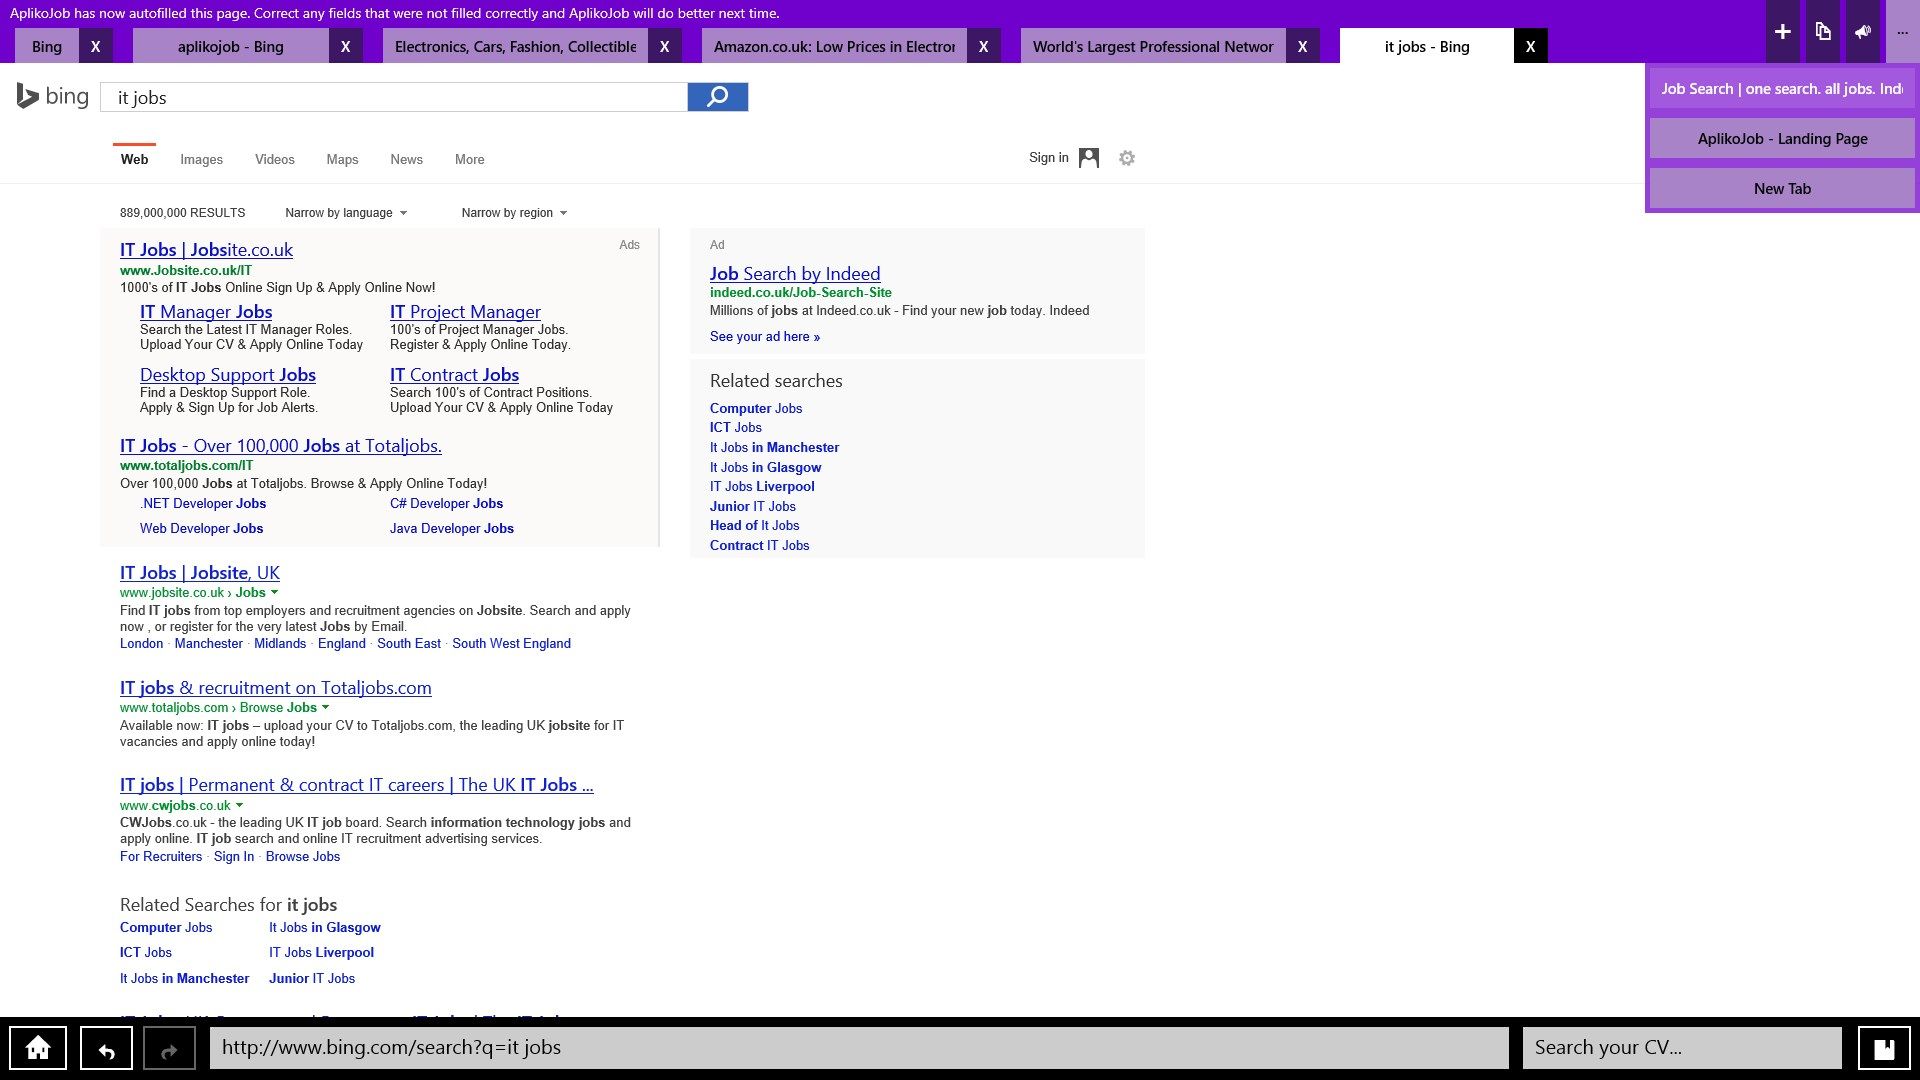 Tabbed browsing allows you to have as many job ads open as you like at any one time.